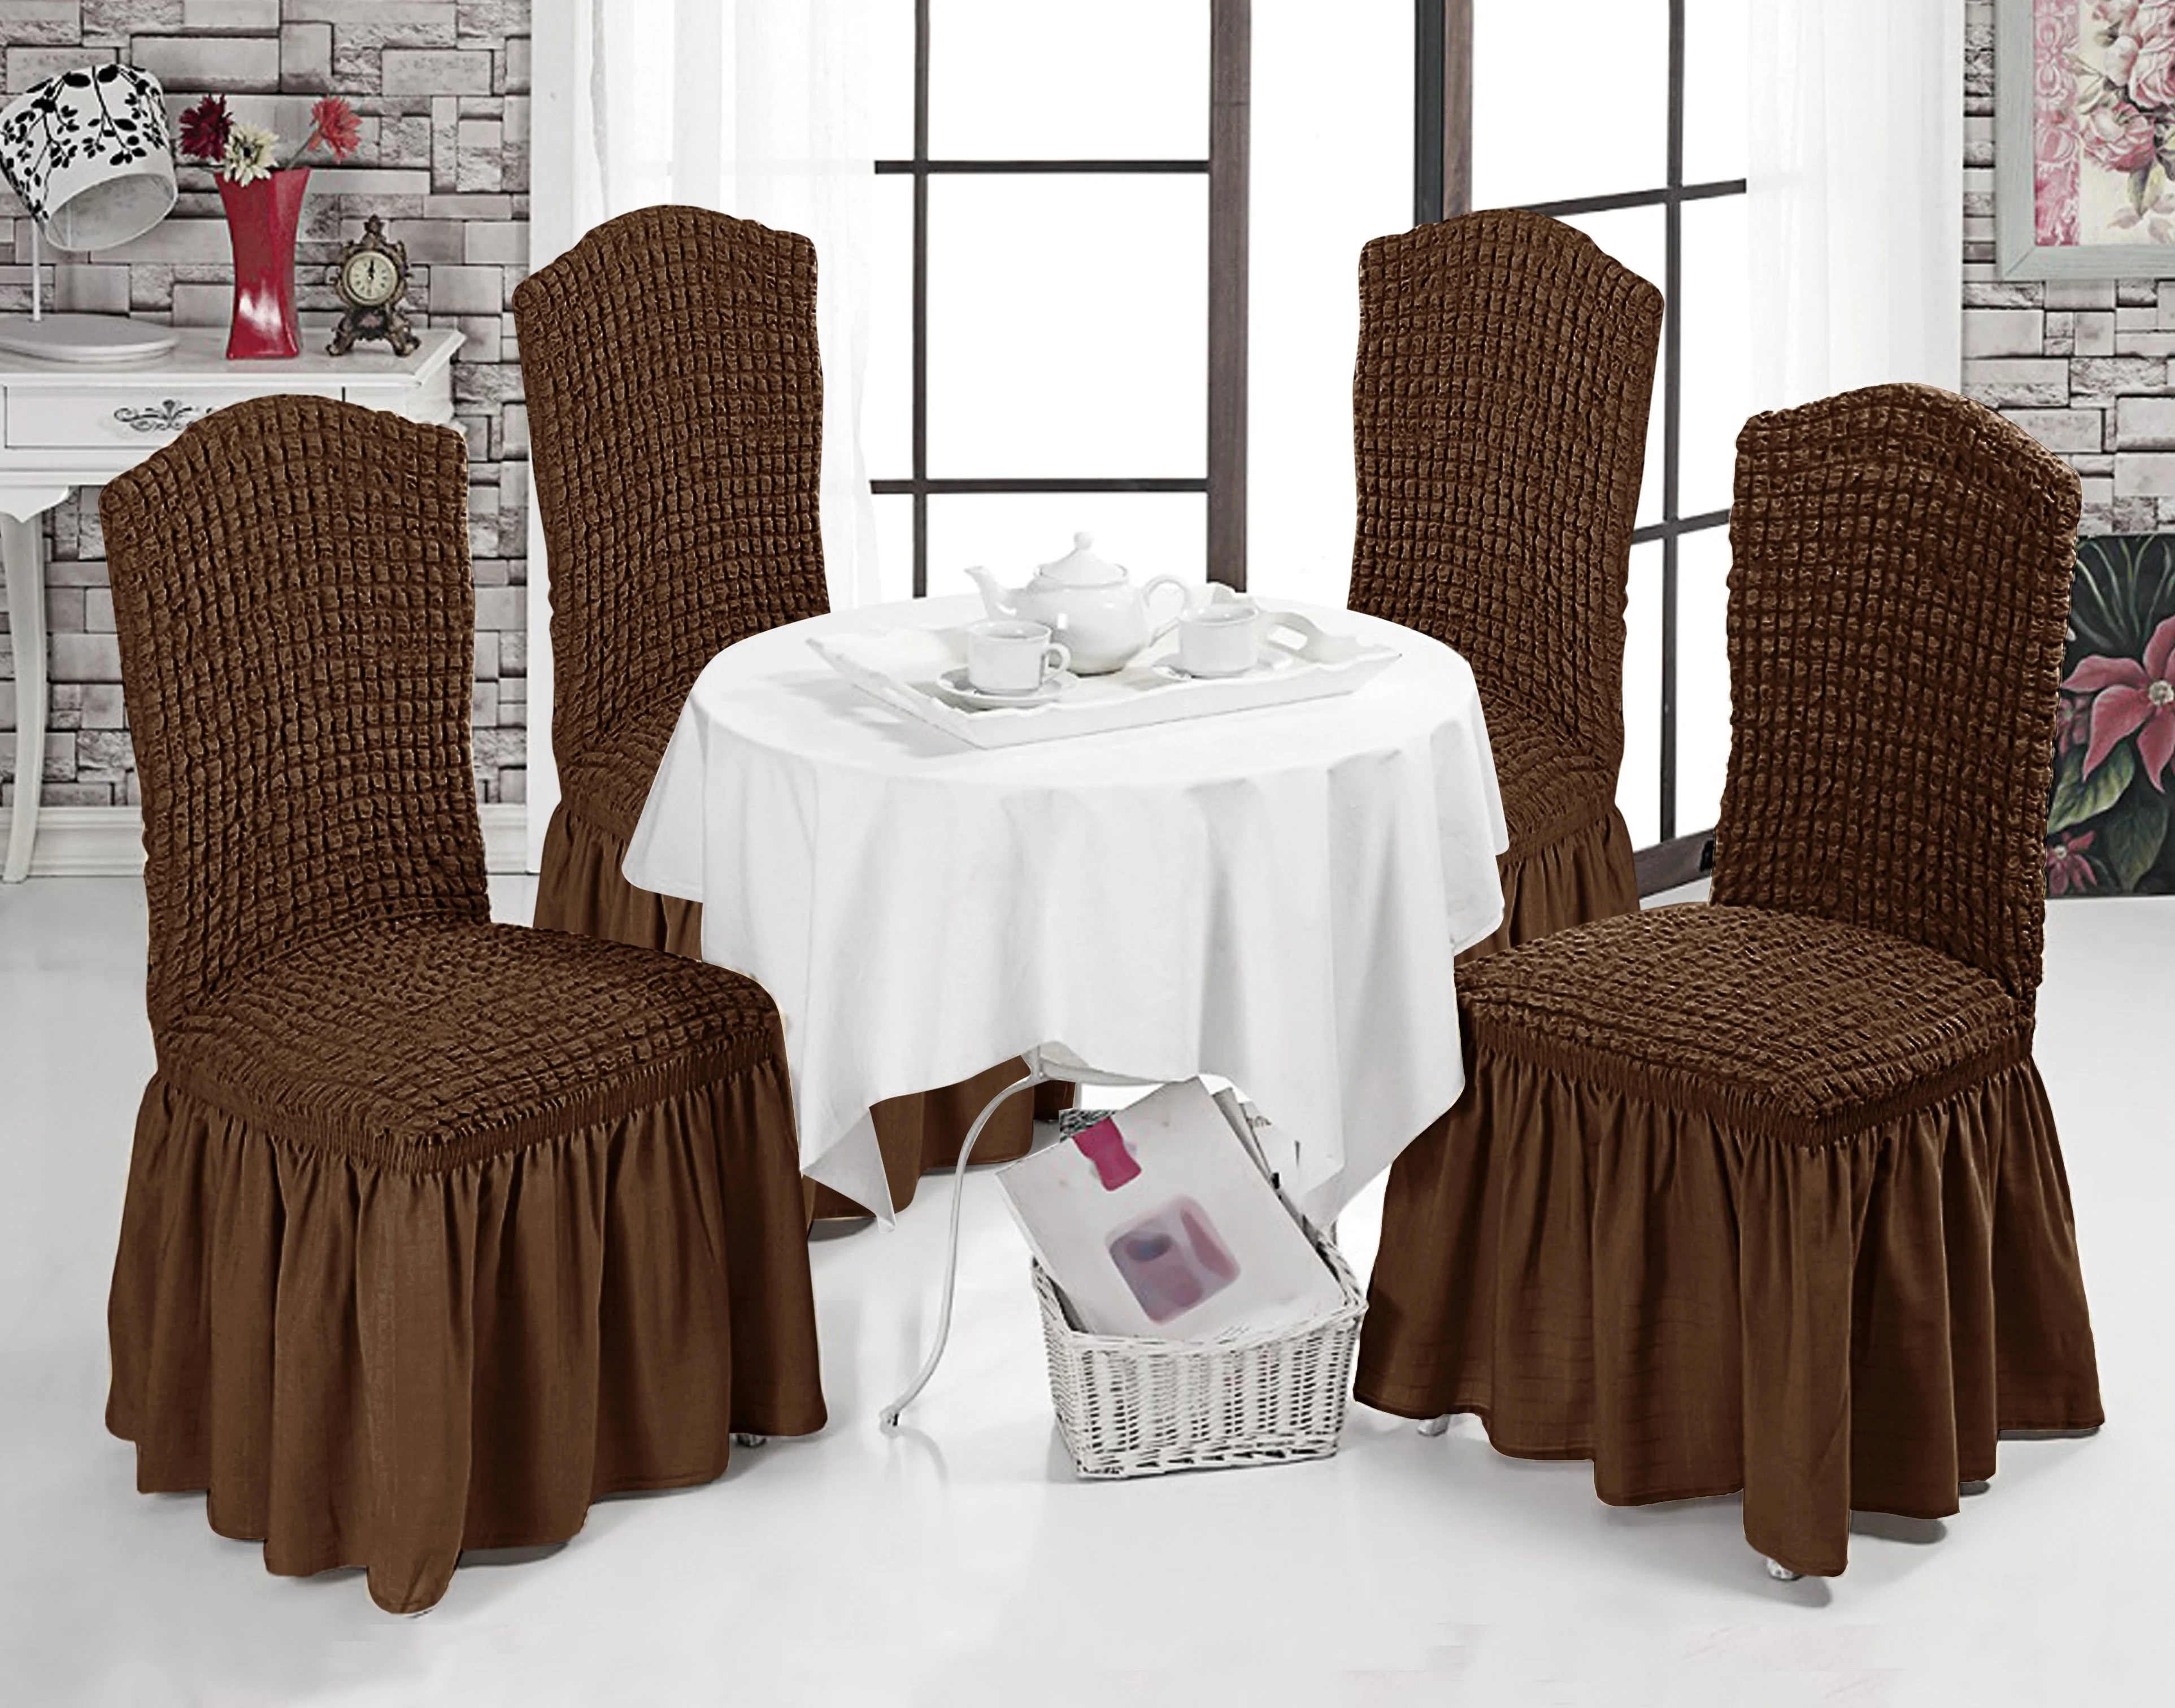 Hot selling bubble chair cover 1/2/4/6/8 pieces set elastic stretch dining chair covers